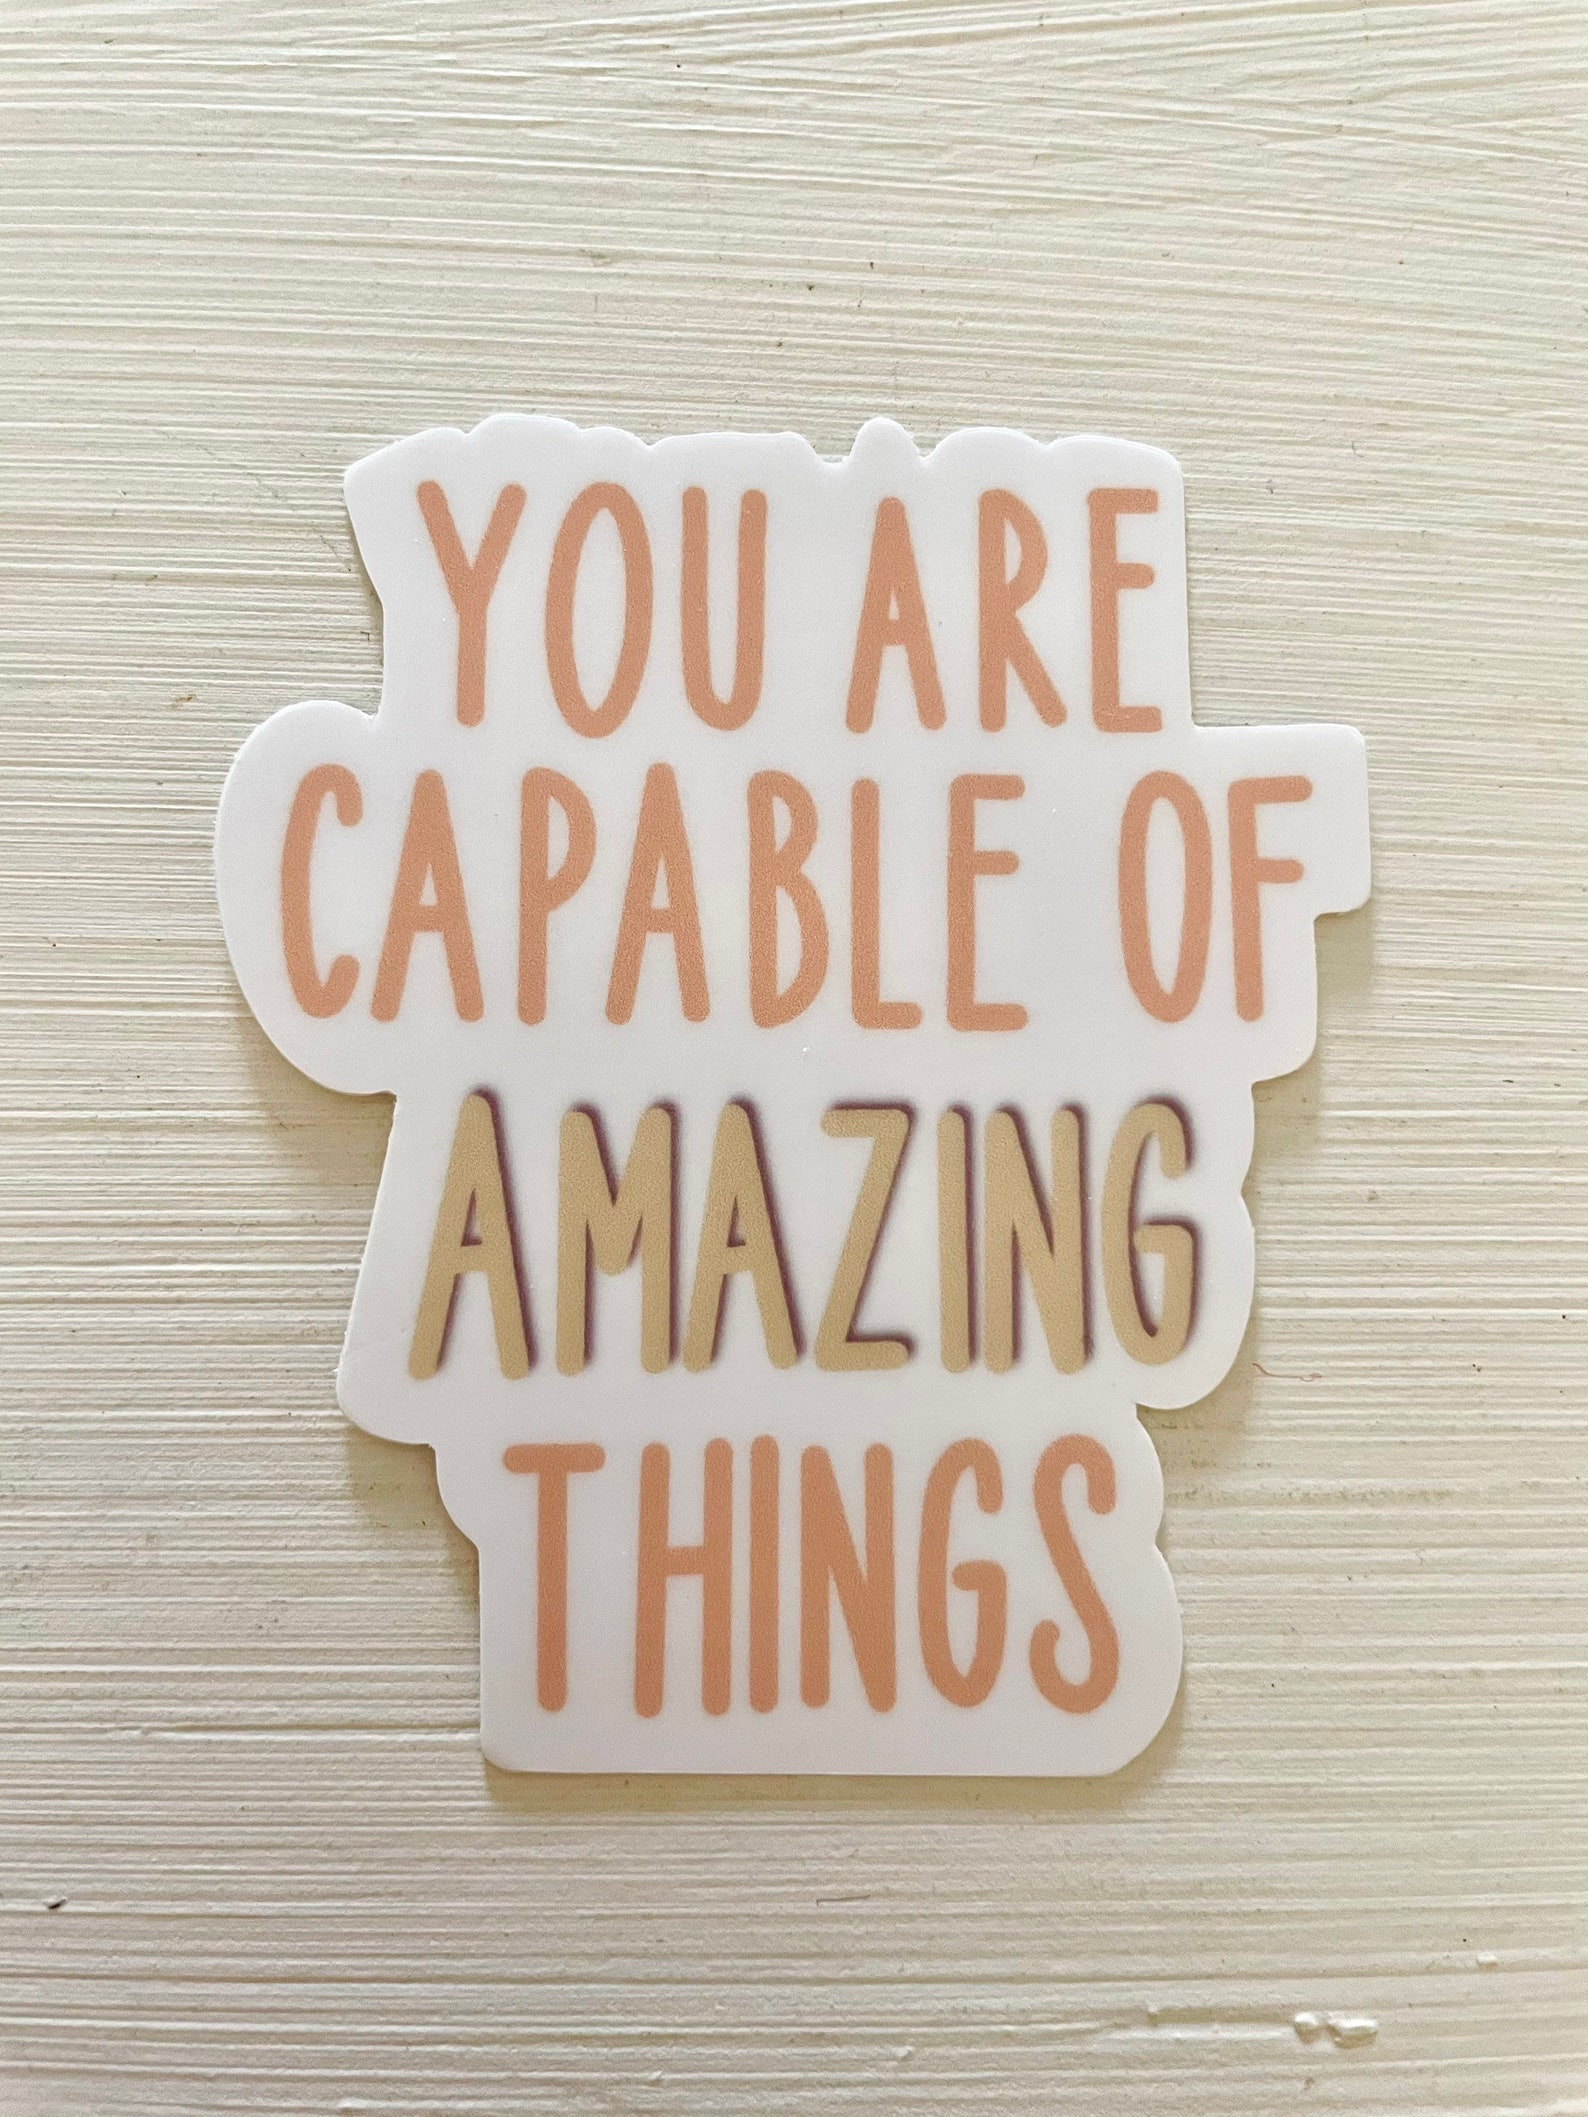 You are capable of amazing things sticker waterproof sticker | Etsy